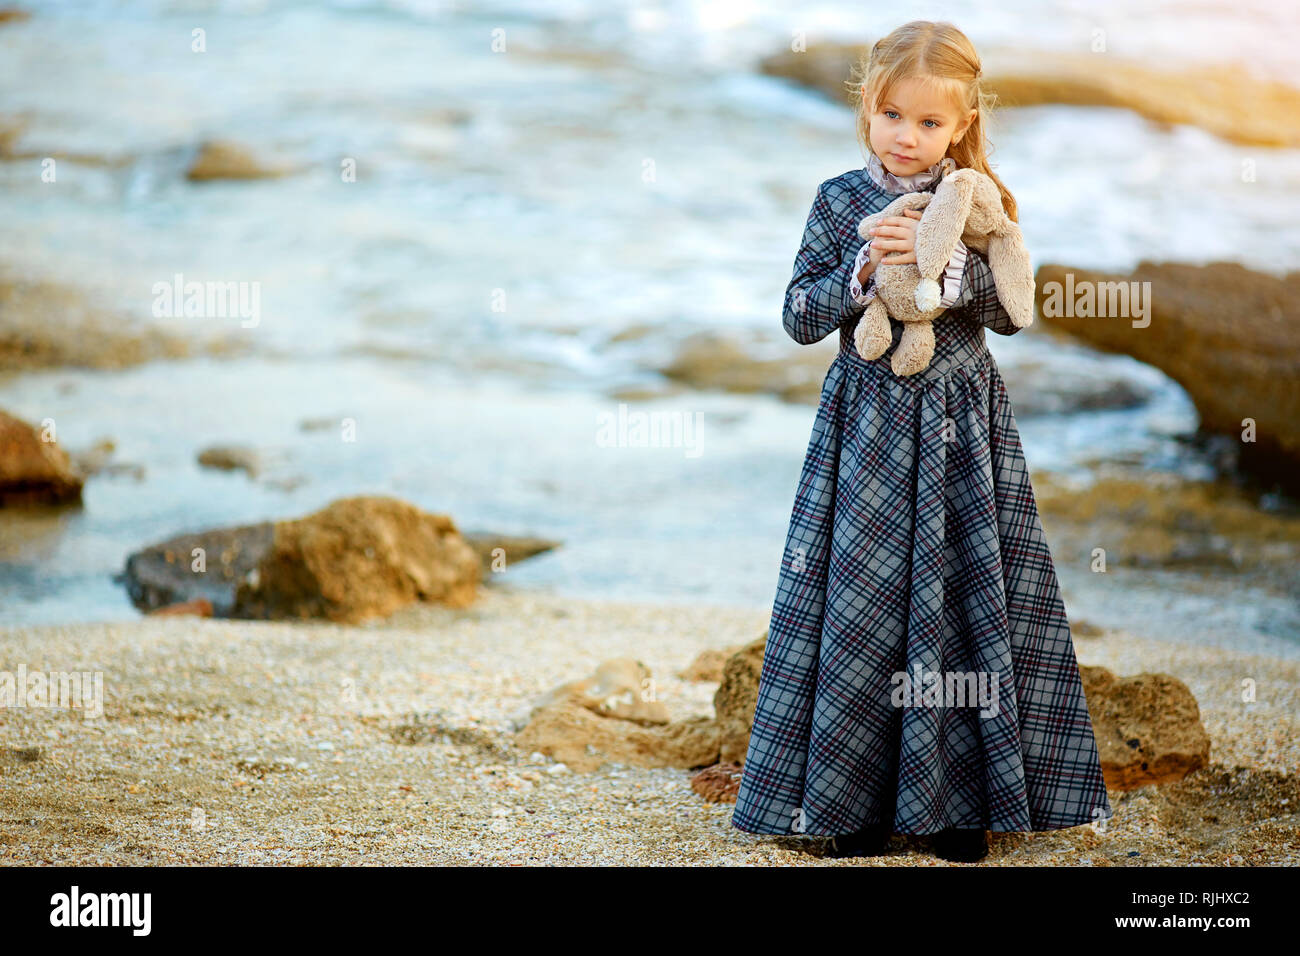 Girl in dress holding bunny toy in nature Stock Photo